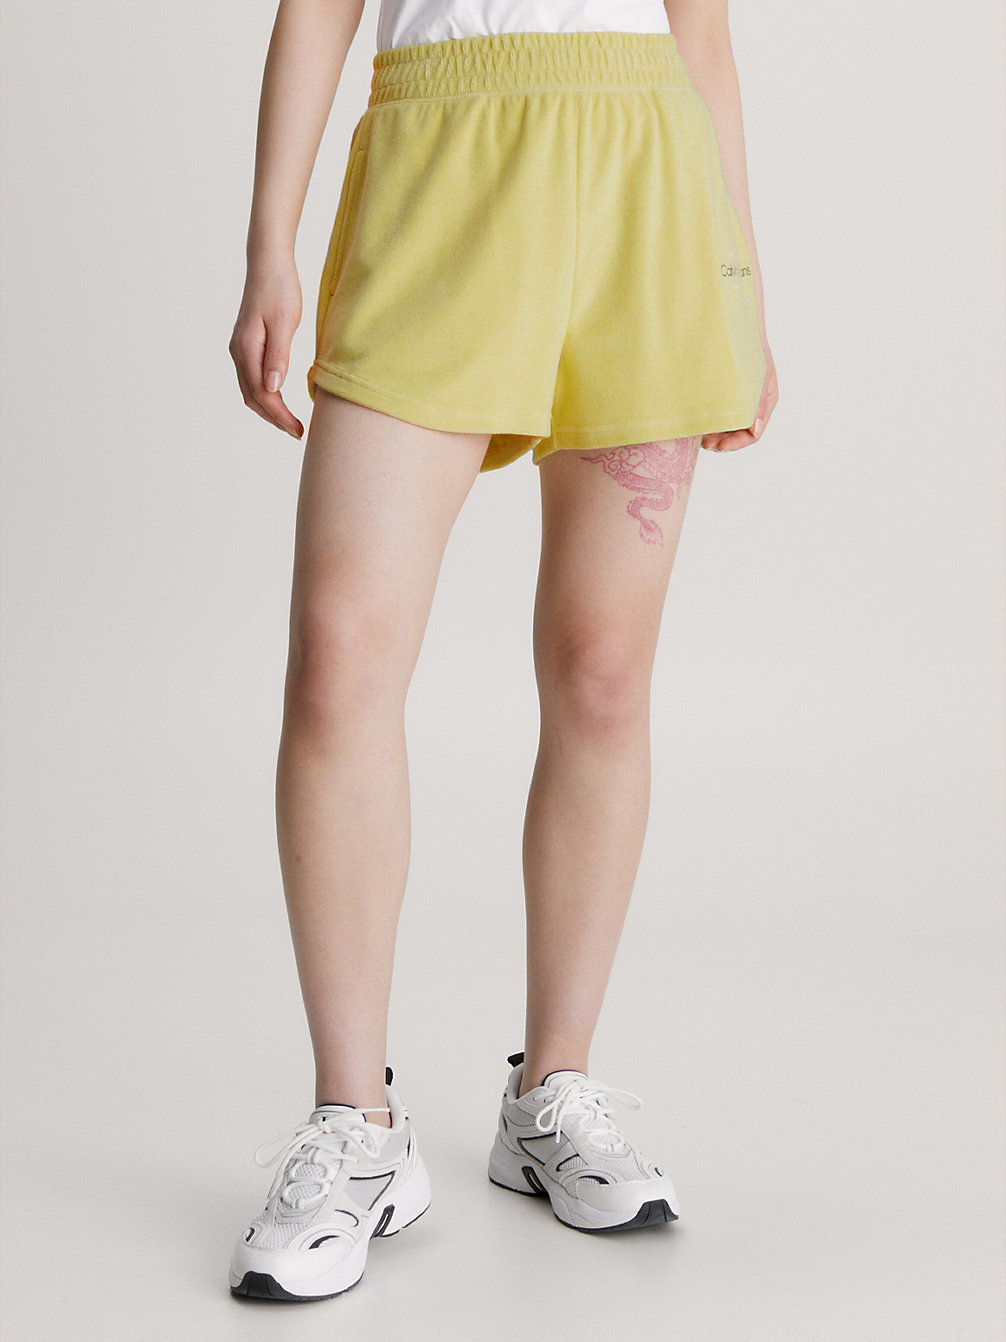 YELLOW SAND Towelling Shorts undefined women Calvin Klein